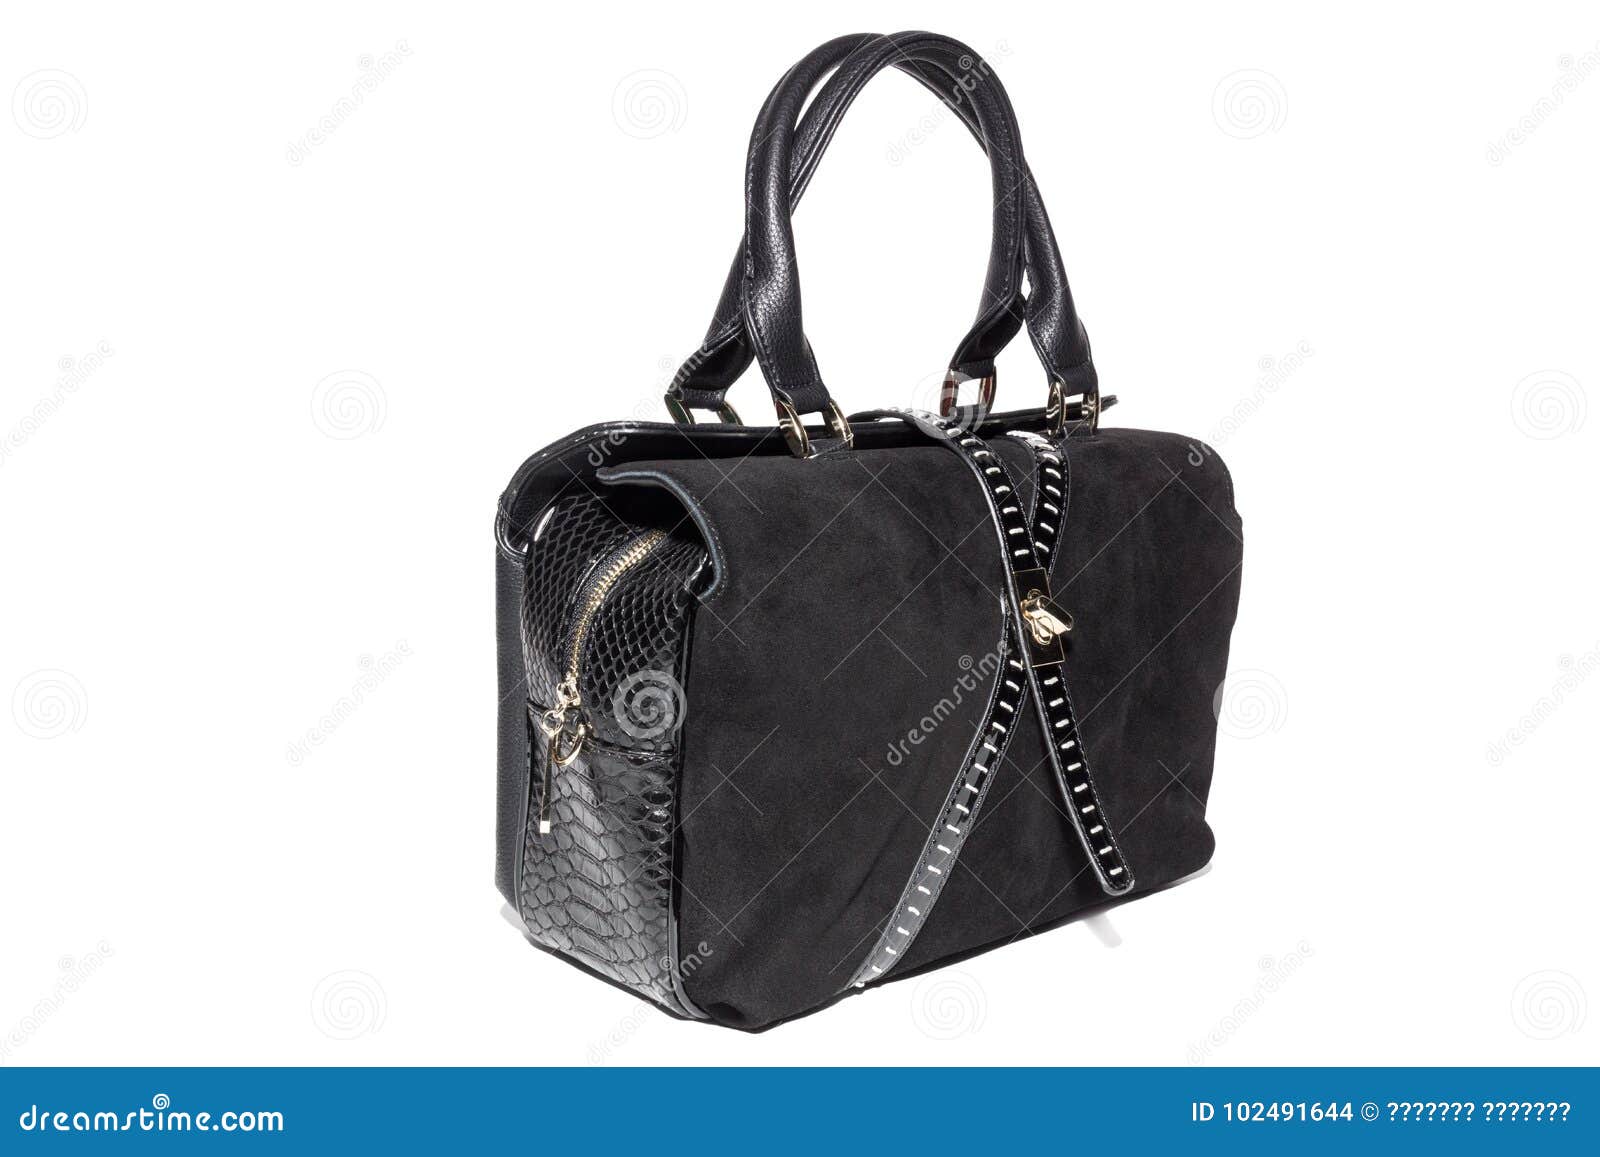 Women`s Suede Bag of Black Color Stock Photo - Image of fashionable ...